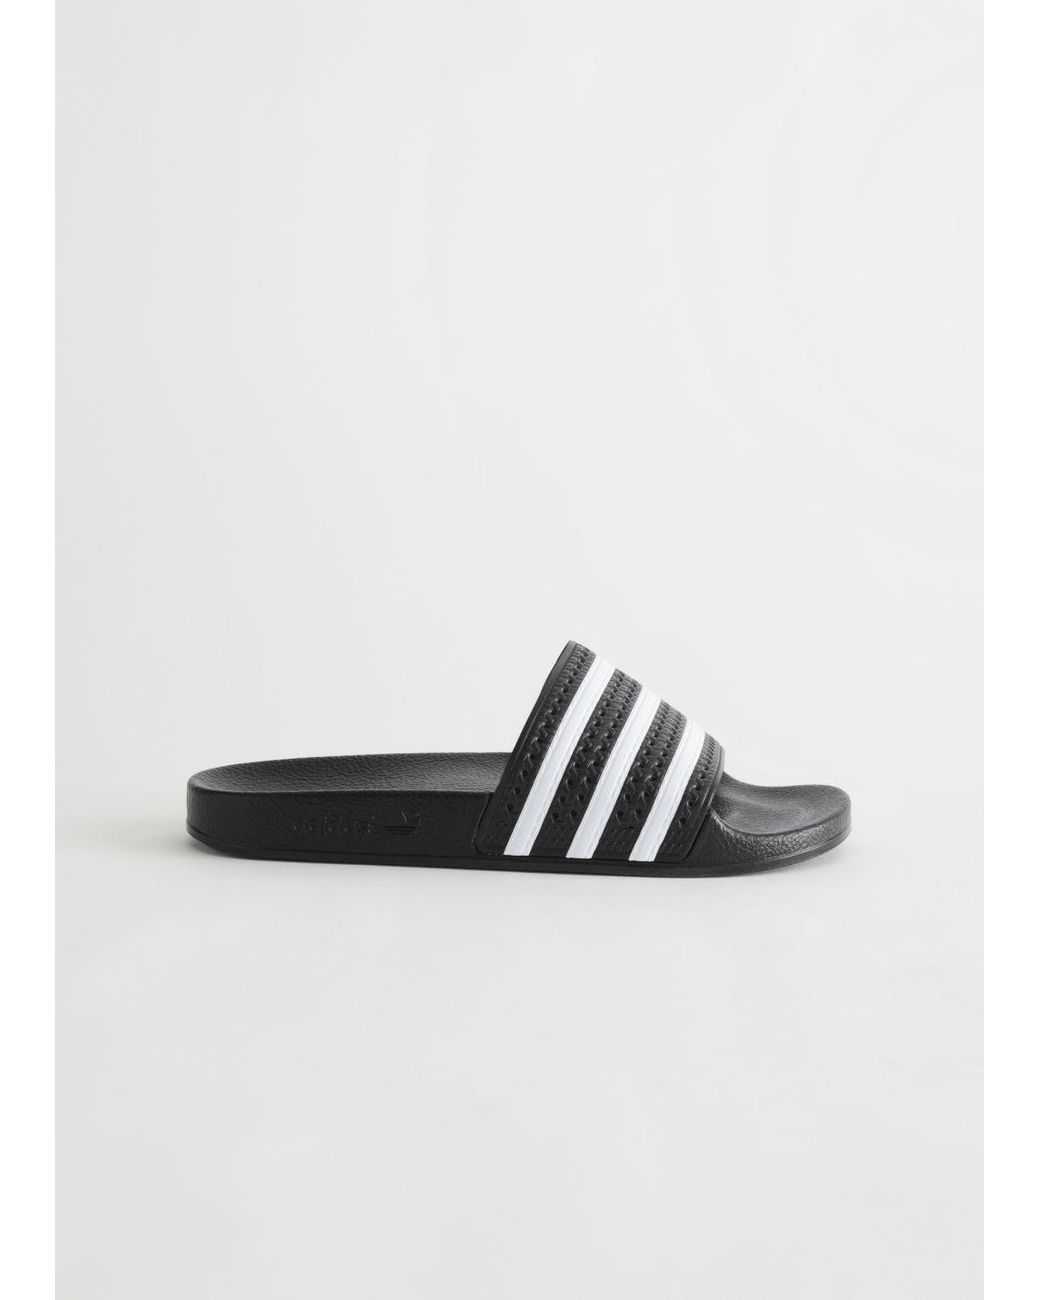 & Other Stories Adidas Adilette Slides in White | Lyst Canada